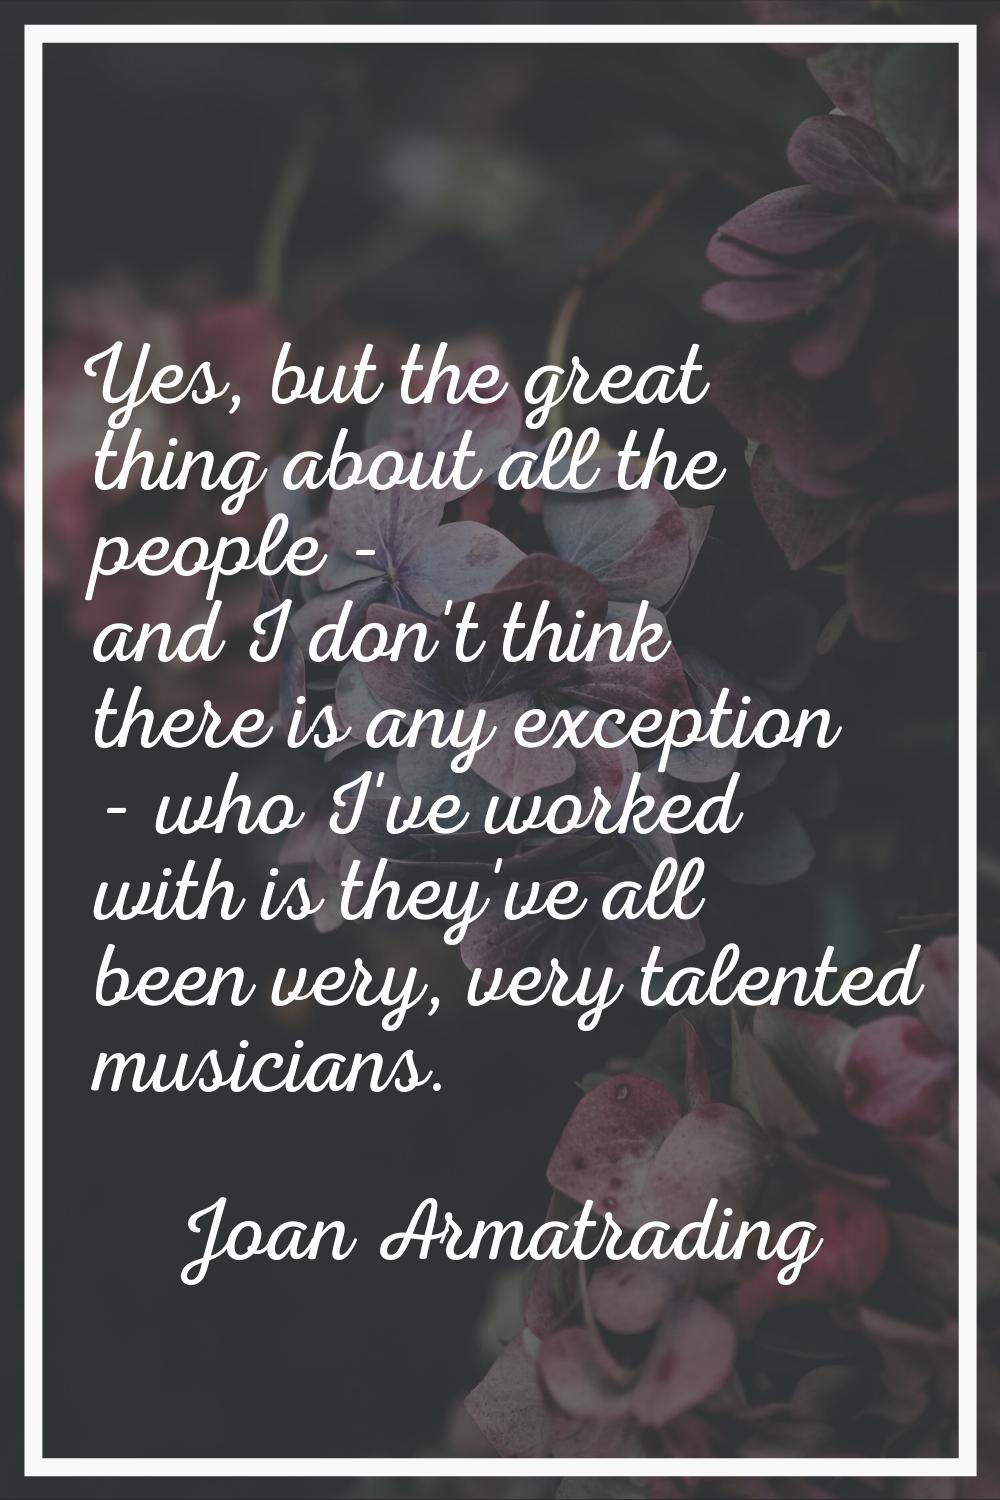 Yes, but the great thing about all the people - and I don't think there is any exception - who I've